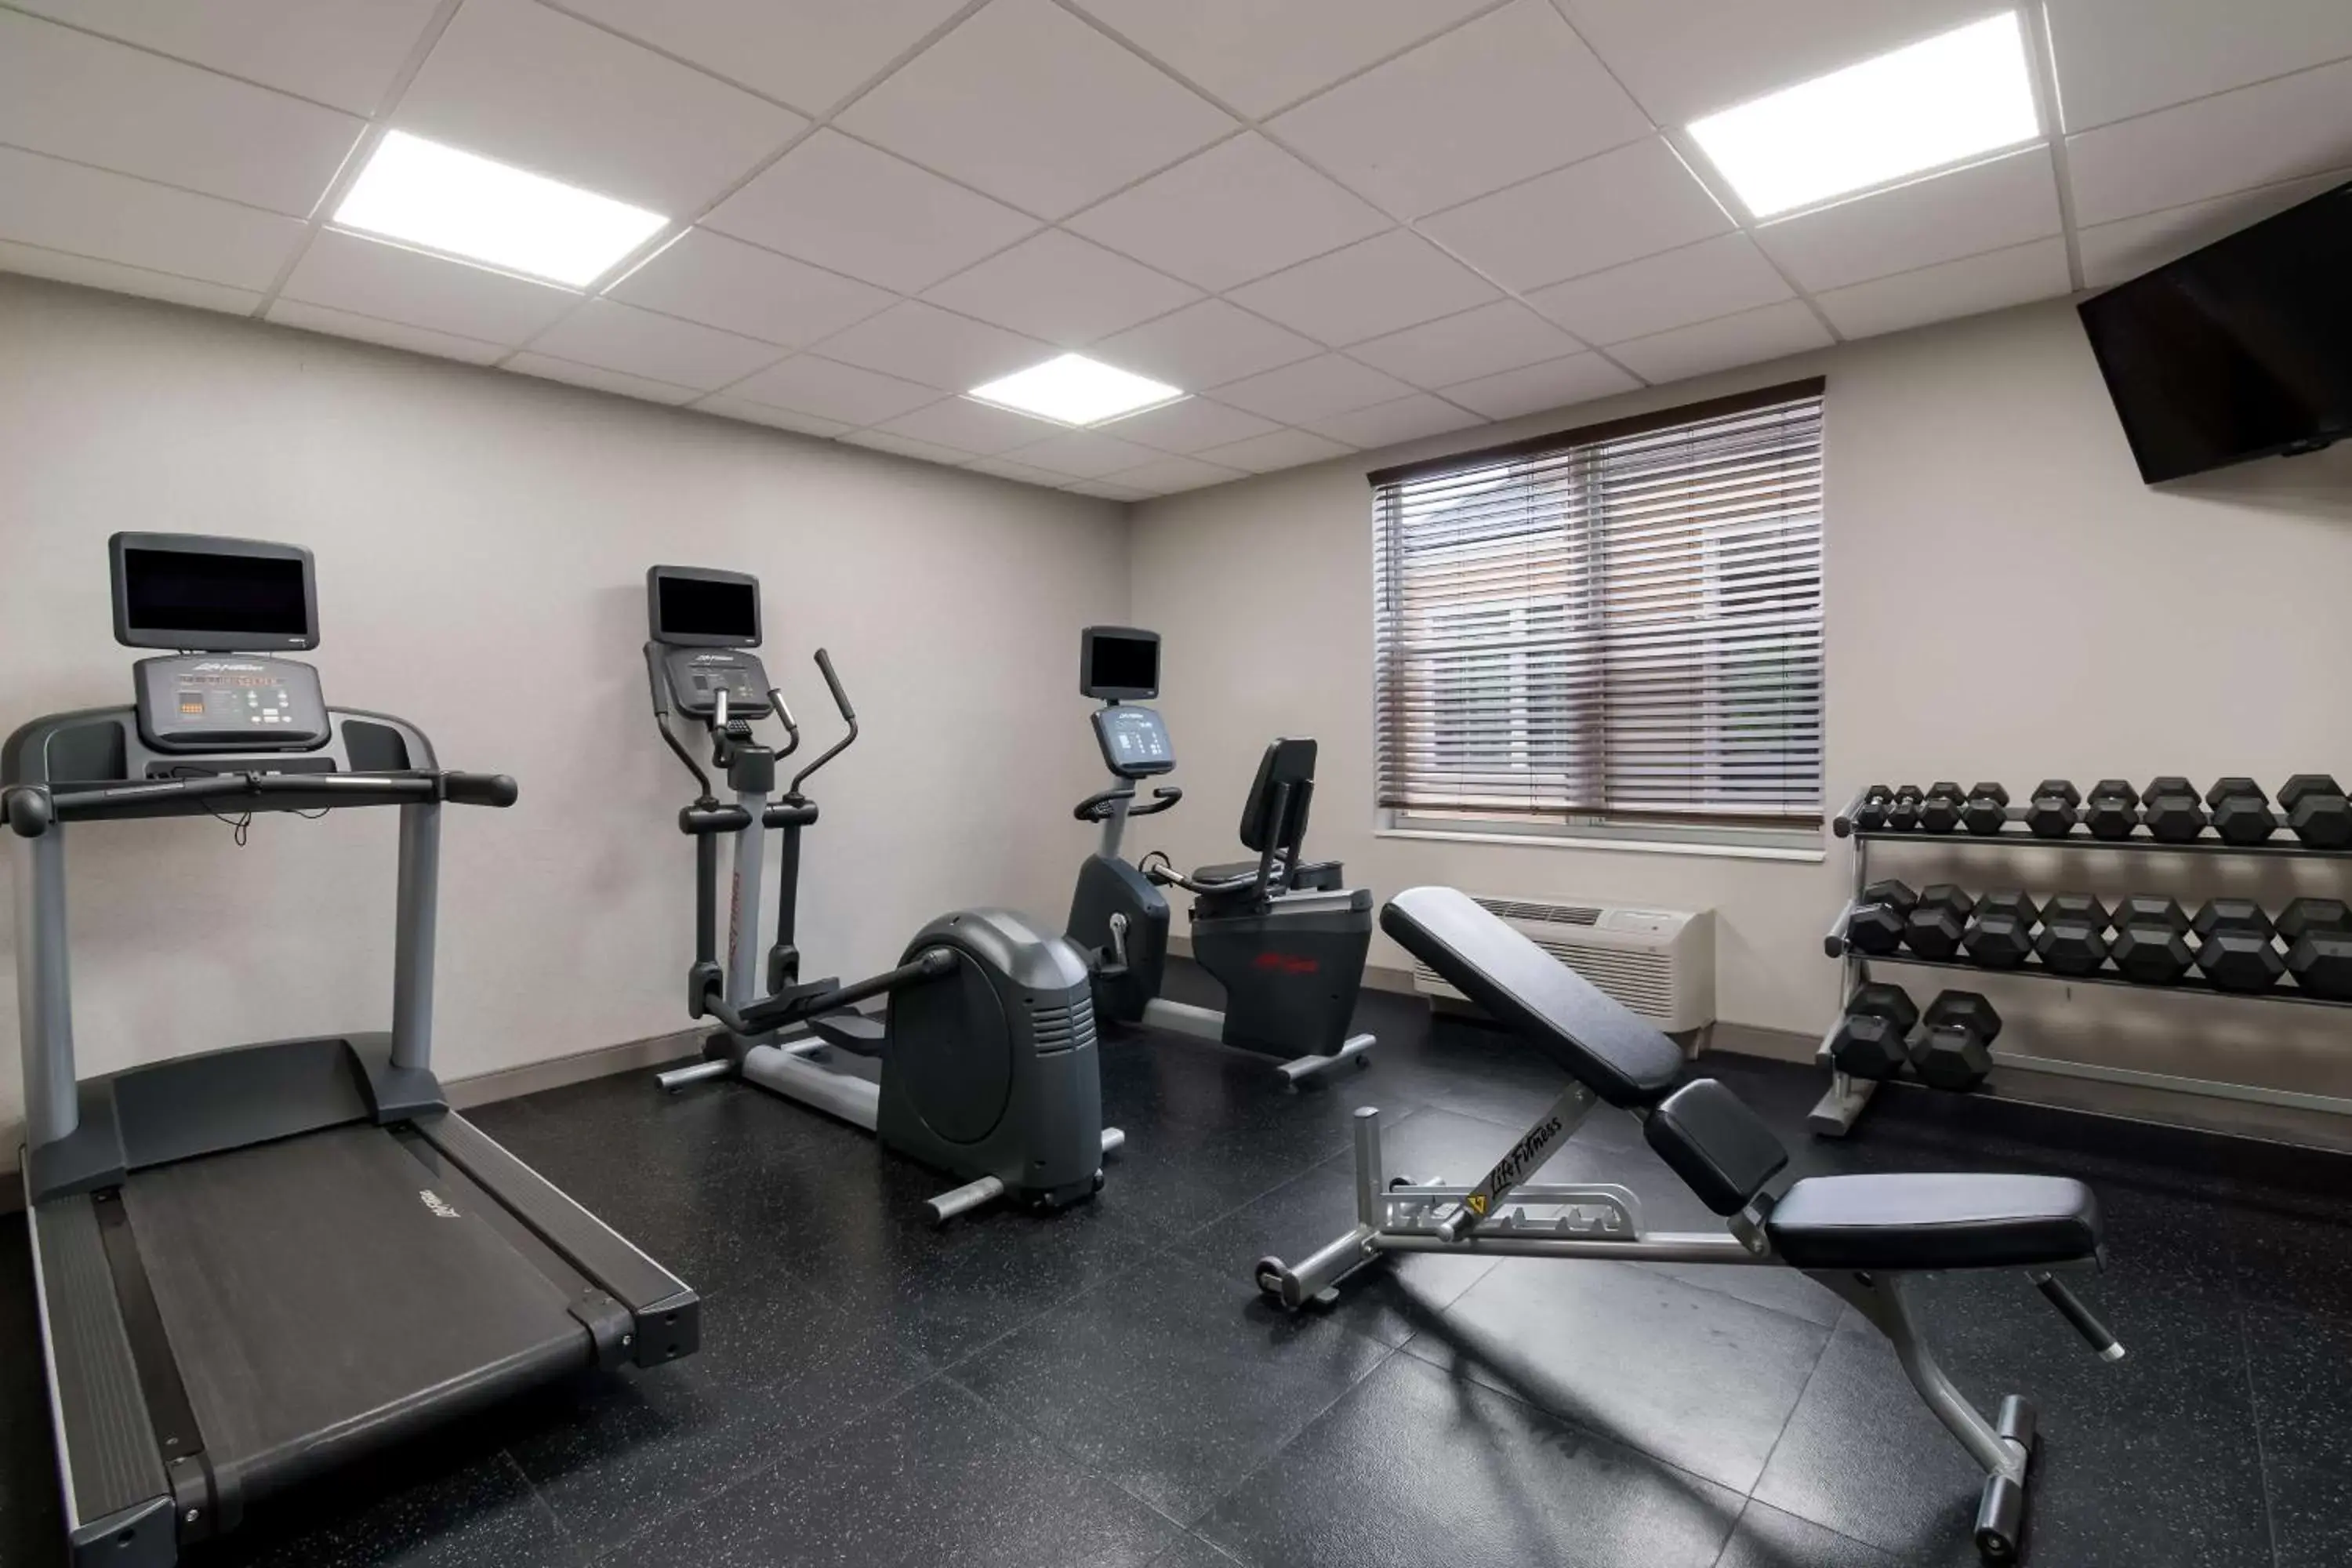 Fitness centre/facilities, Fitness Center/Facilities in Country Inn & Suites by Radisson, Harrisburg Northeast (Hershey), PA